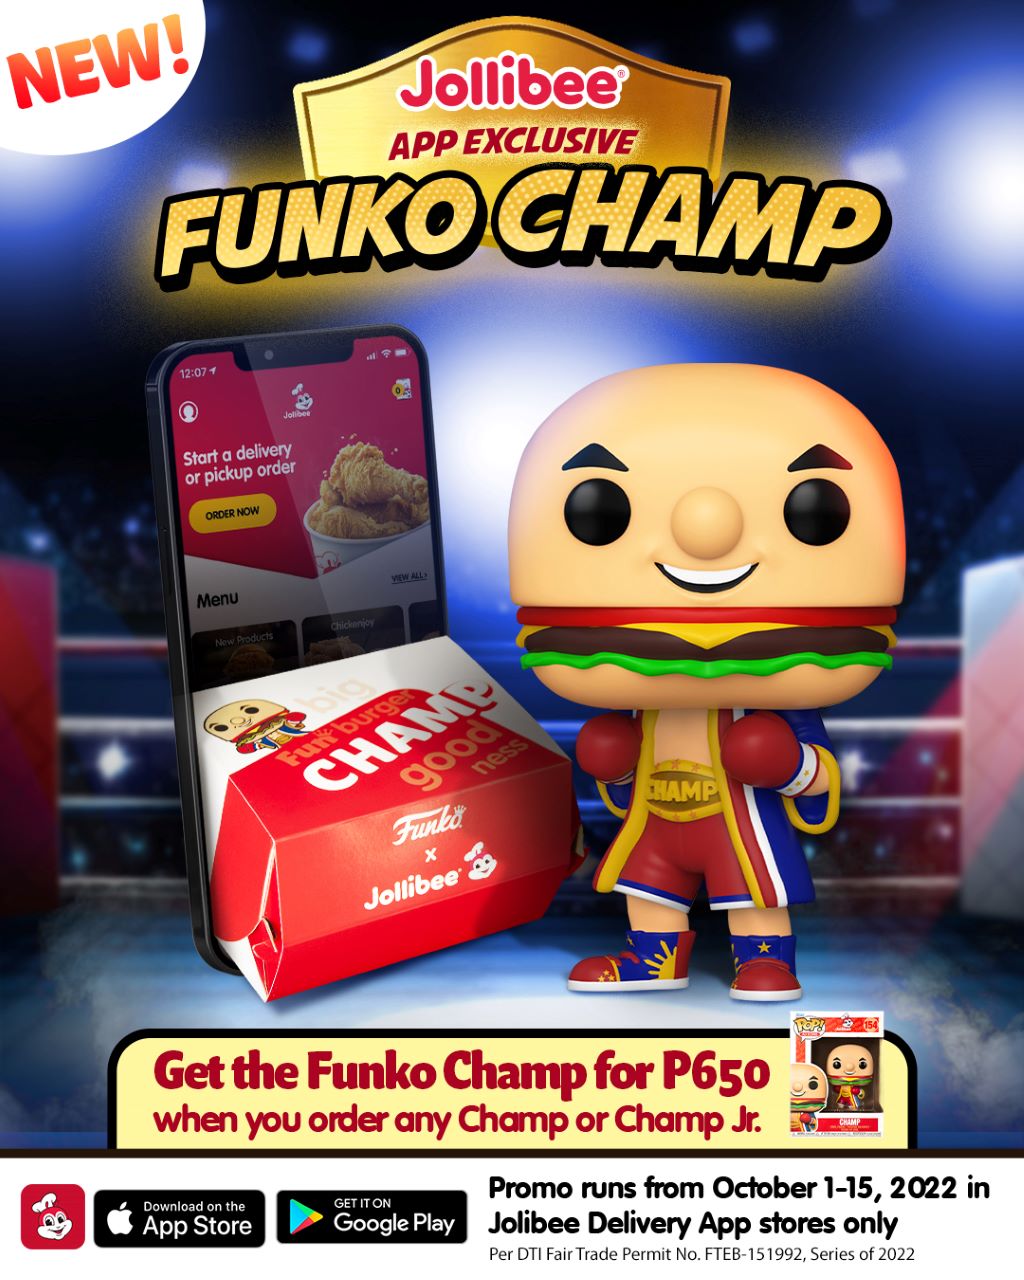 Funko Teams Up With McDonalds for New Line of Pop Vinyls